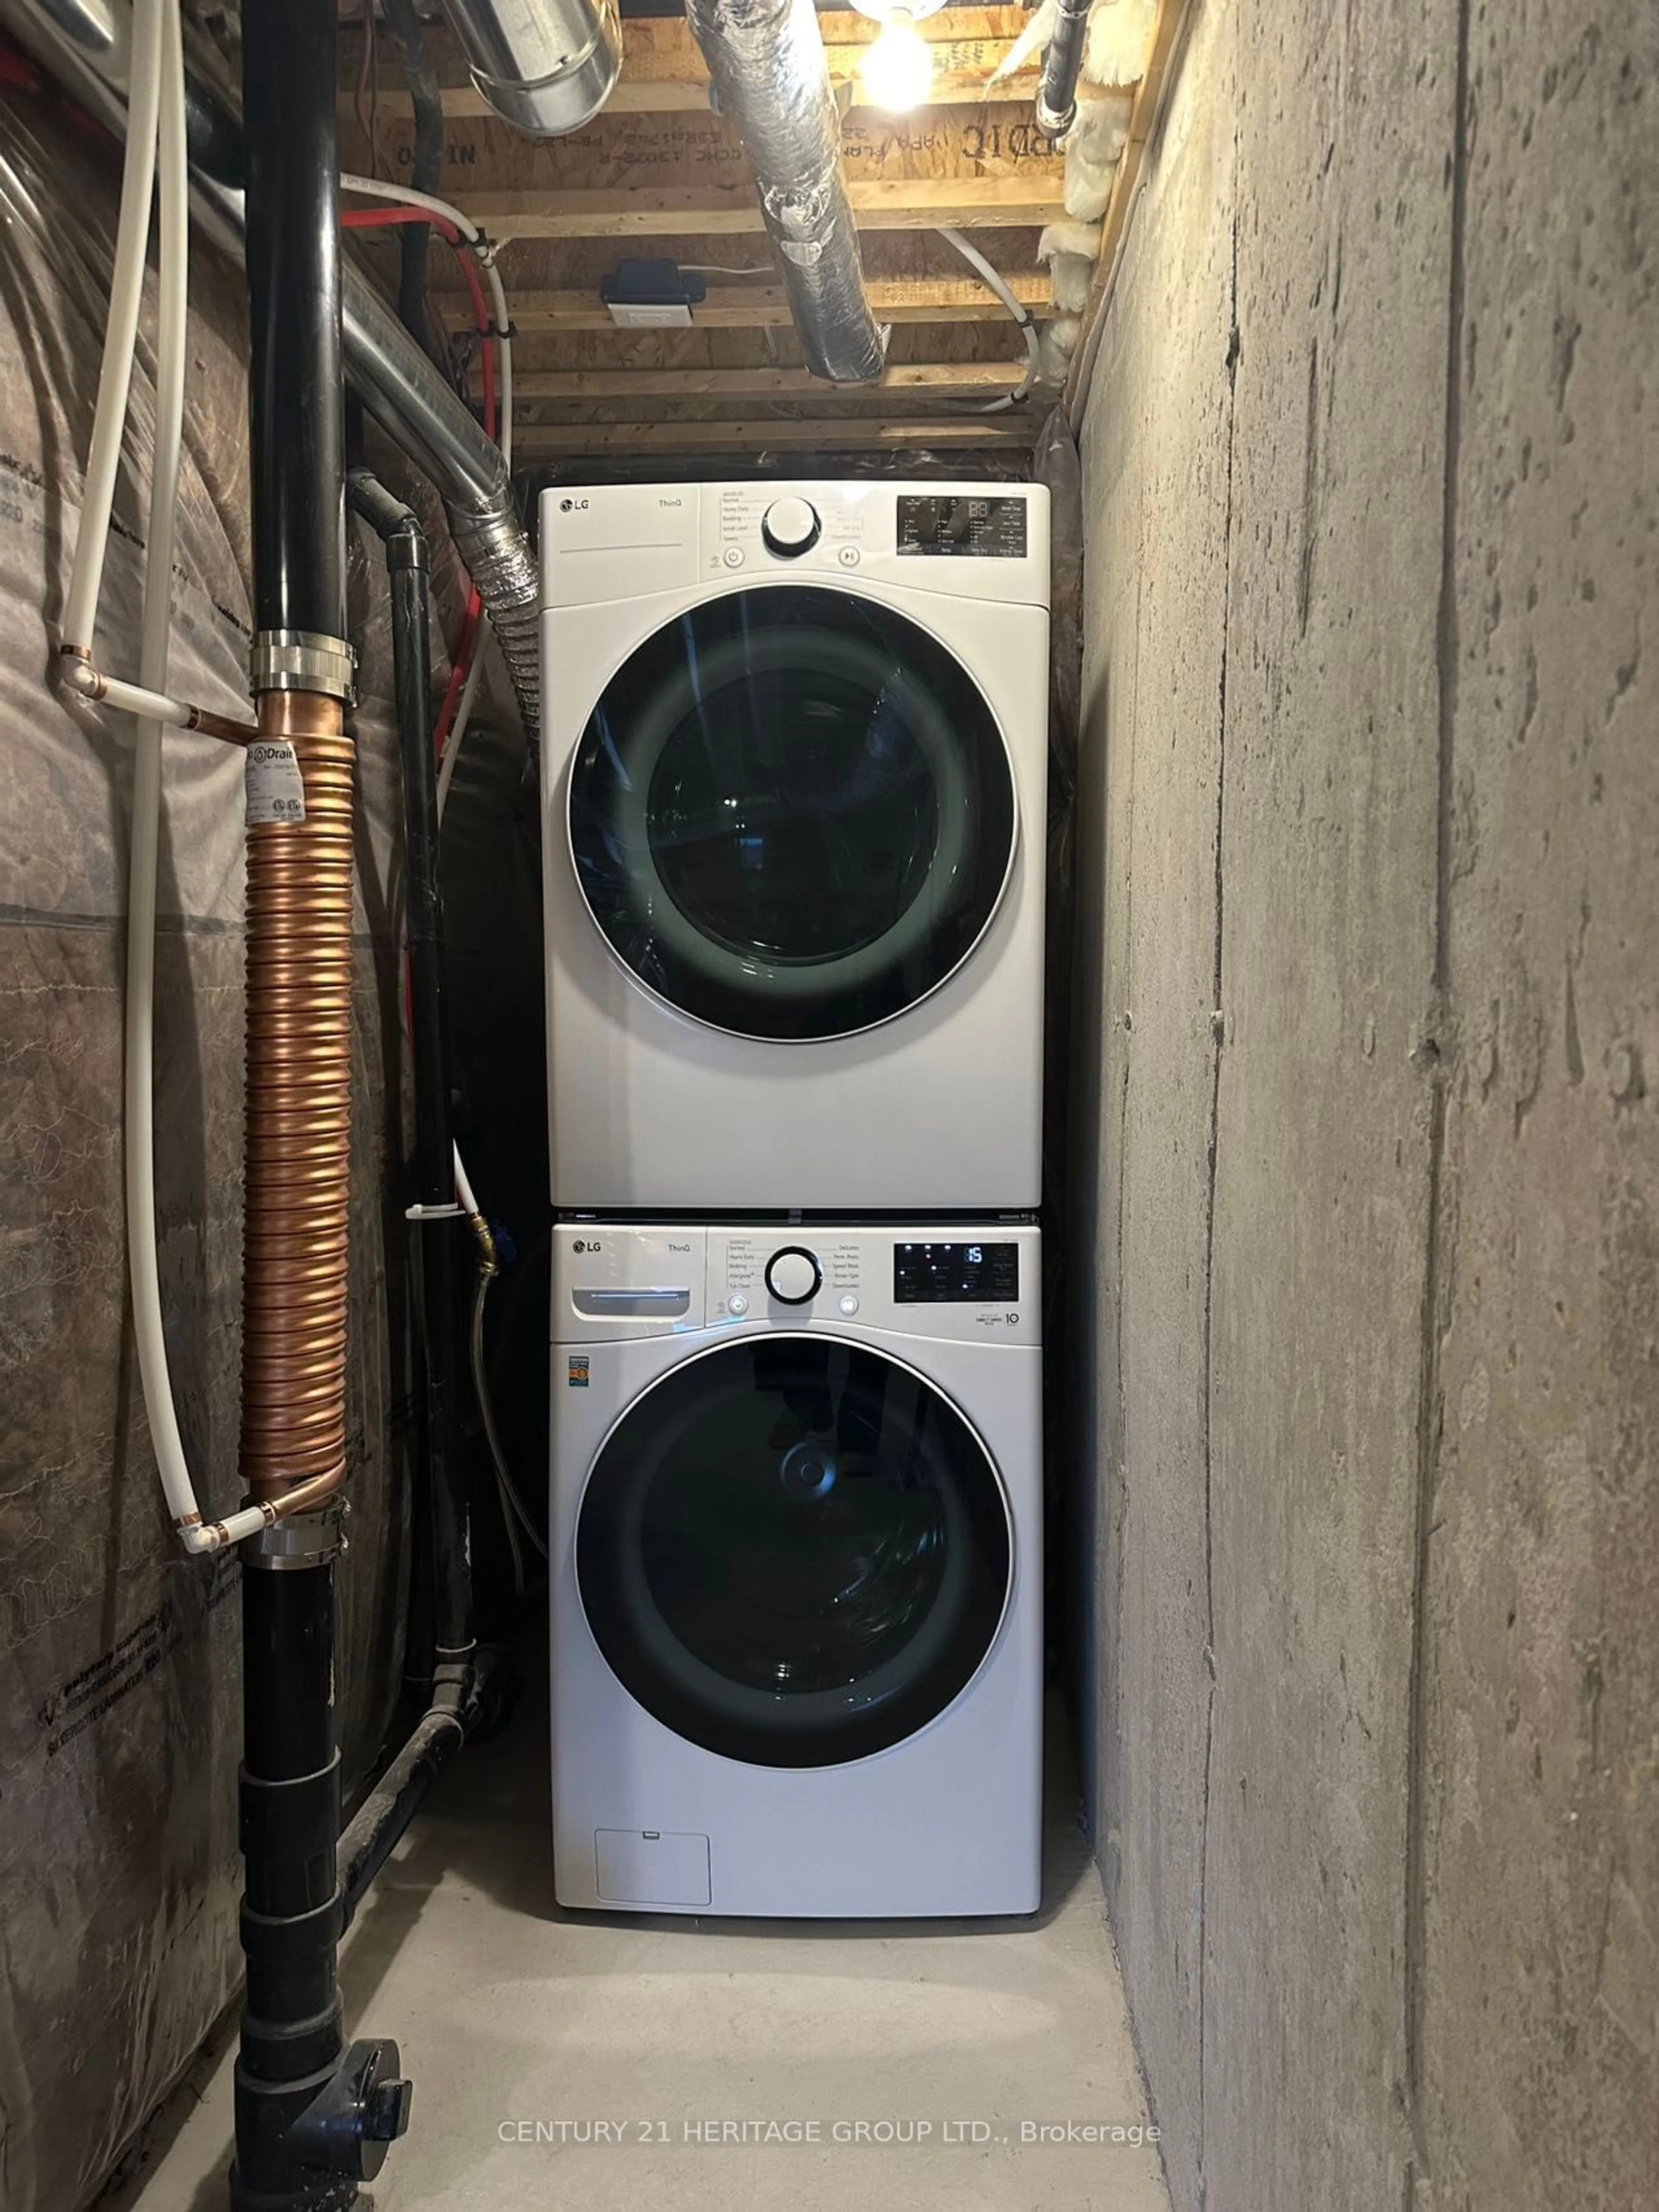 Washer and dryer for 55 Mikayla Lane, Markham Ontario L1M 2J1